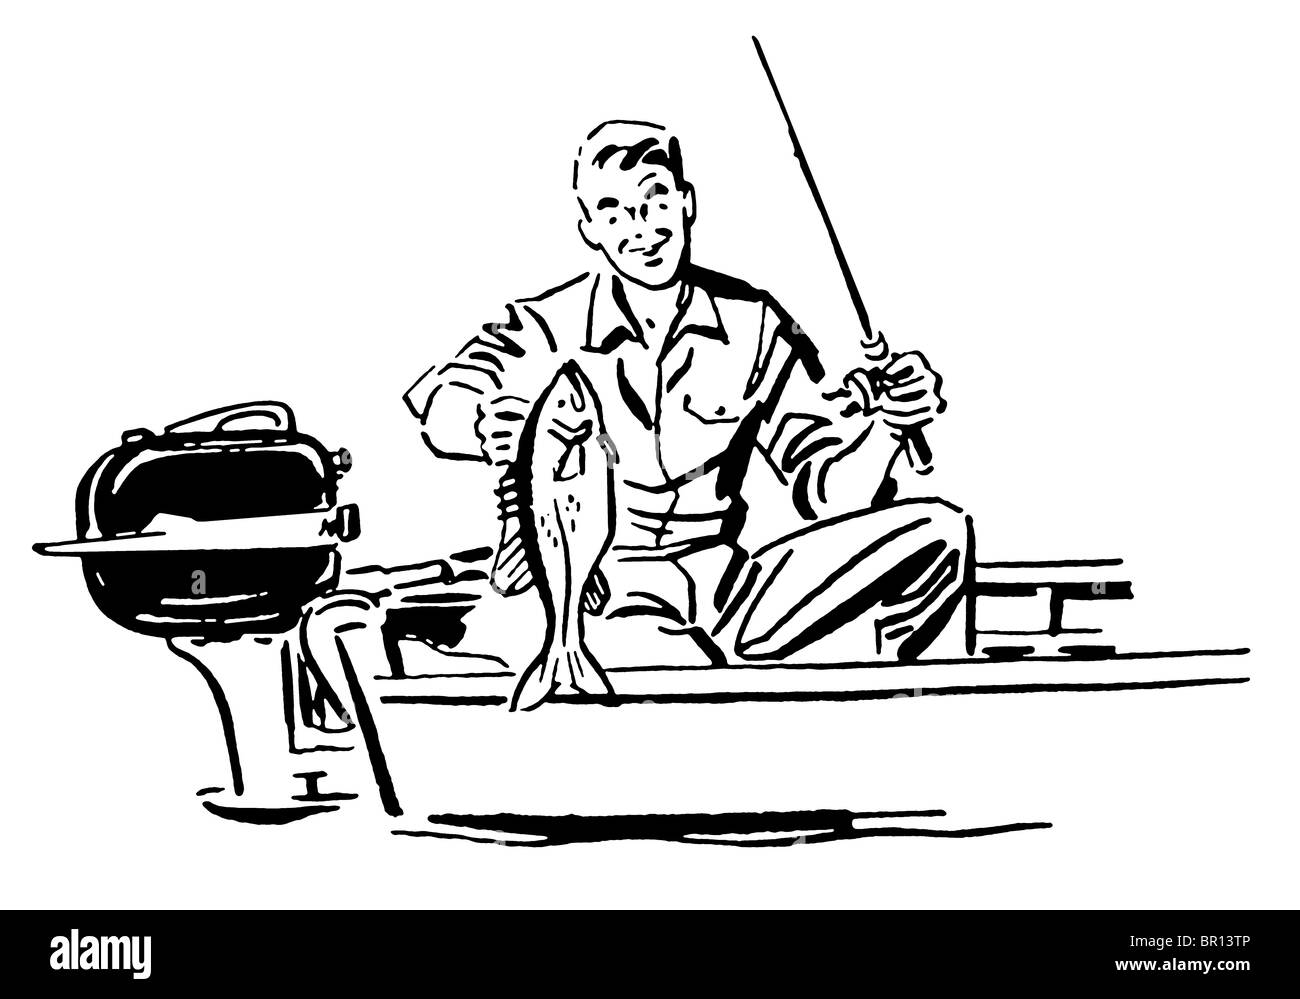 A black and white version of a man on a fishing trip Stock Photo